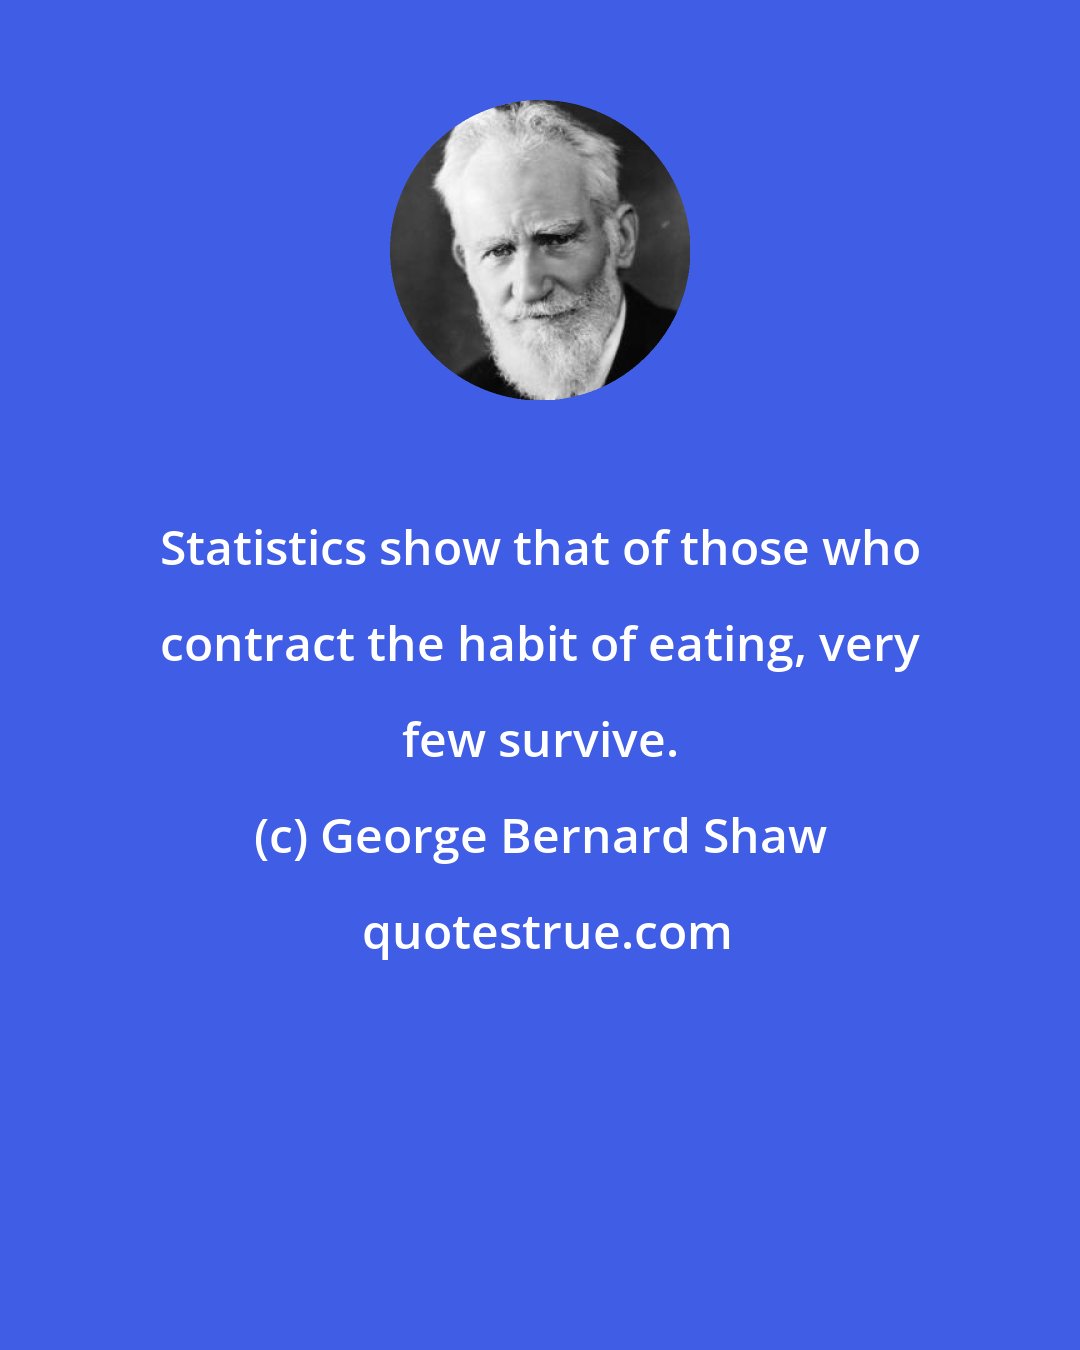 George Bernard Shaw: Statistics show that of those who contract the habit of eating, very few survive.